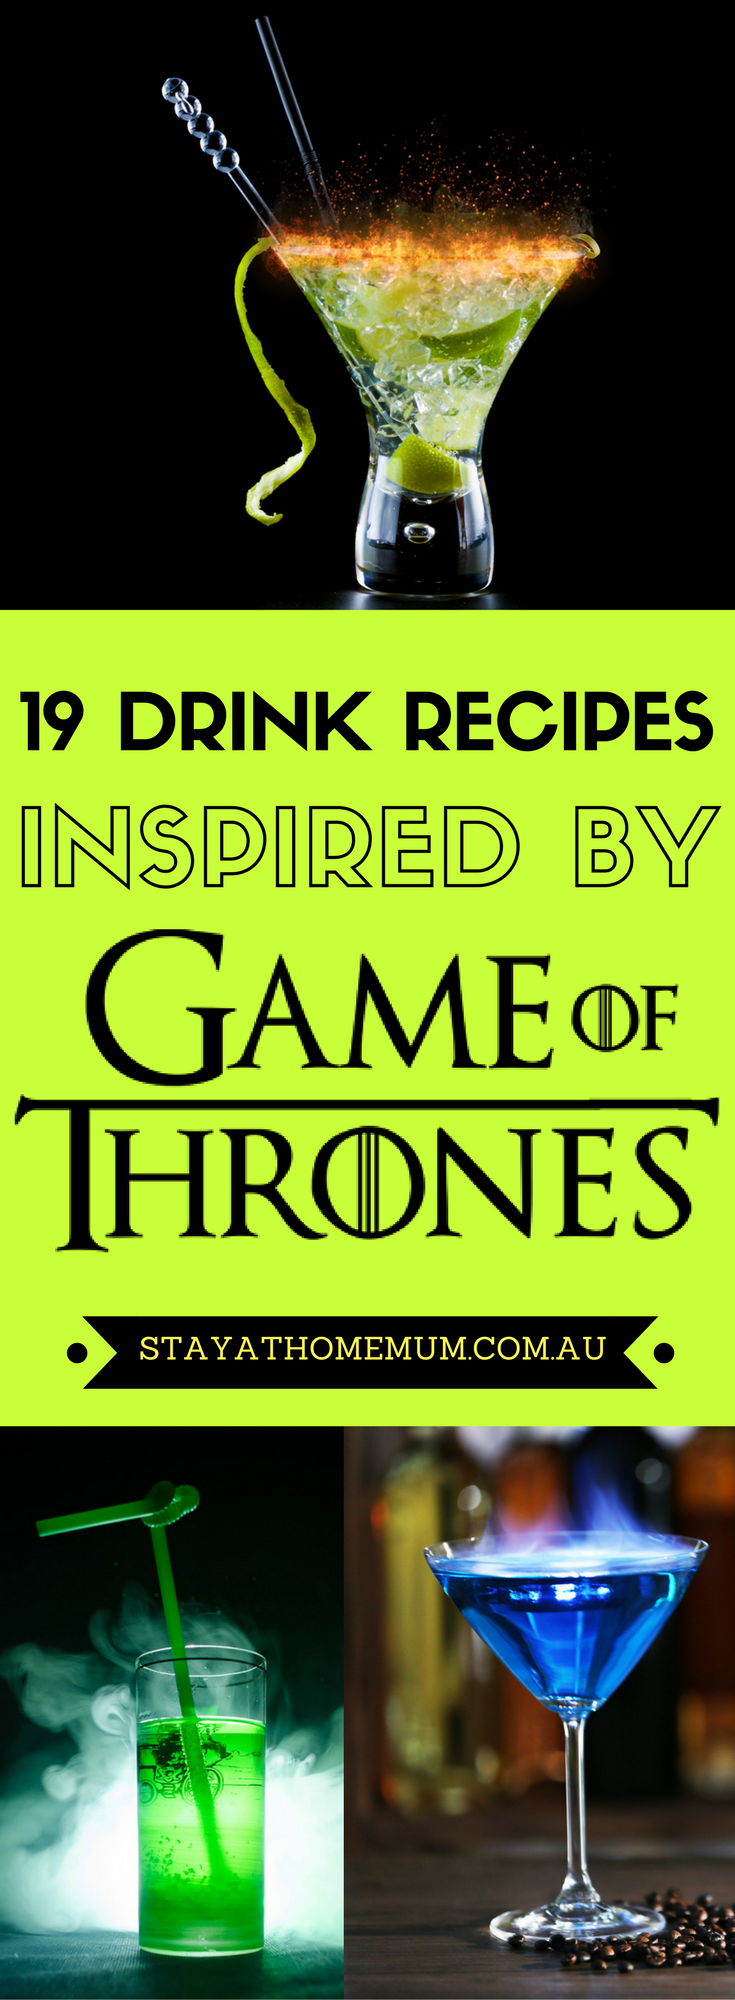 19 Drink Recipes Inspired By Game Of Thrones (2)